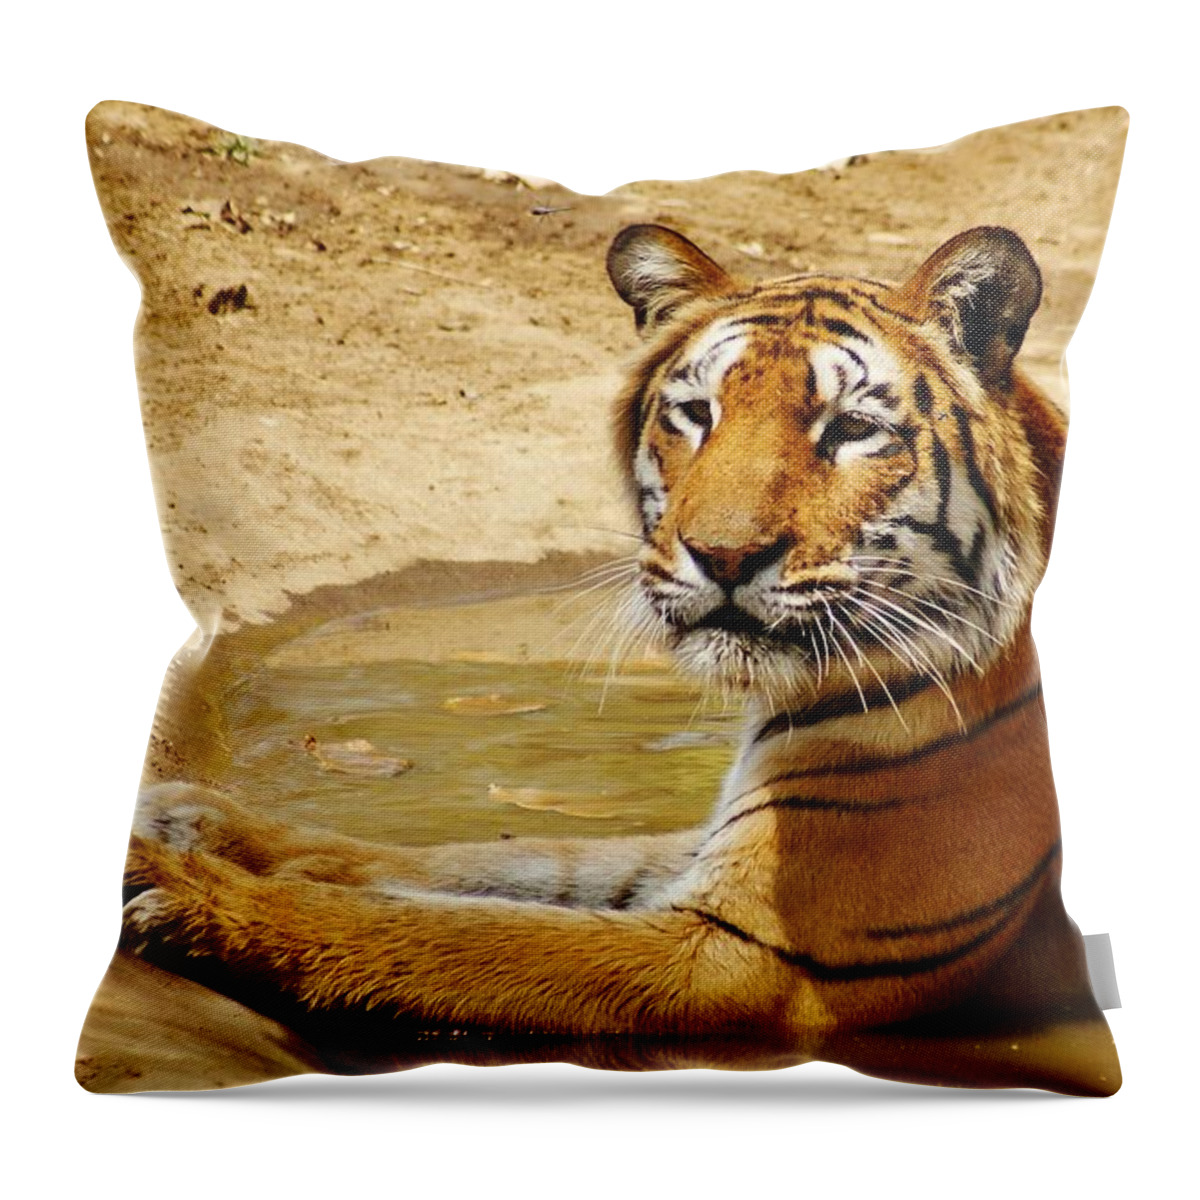 Animal Themes Throw Pillow featuring the photograph Tigress Sitting In Water by Aaj